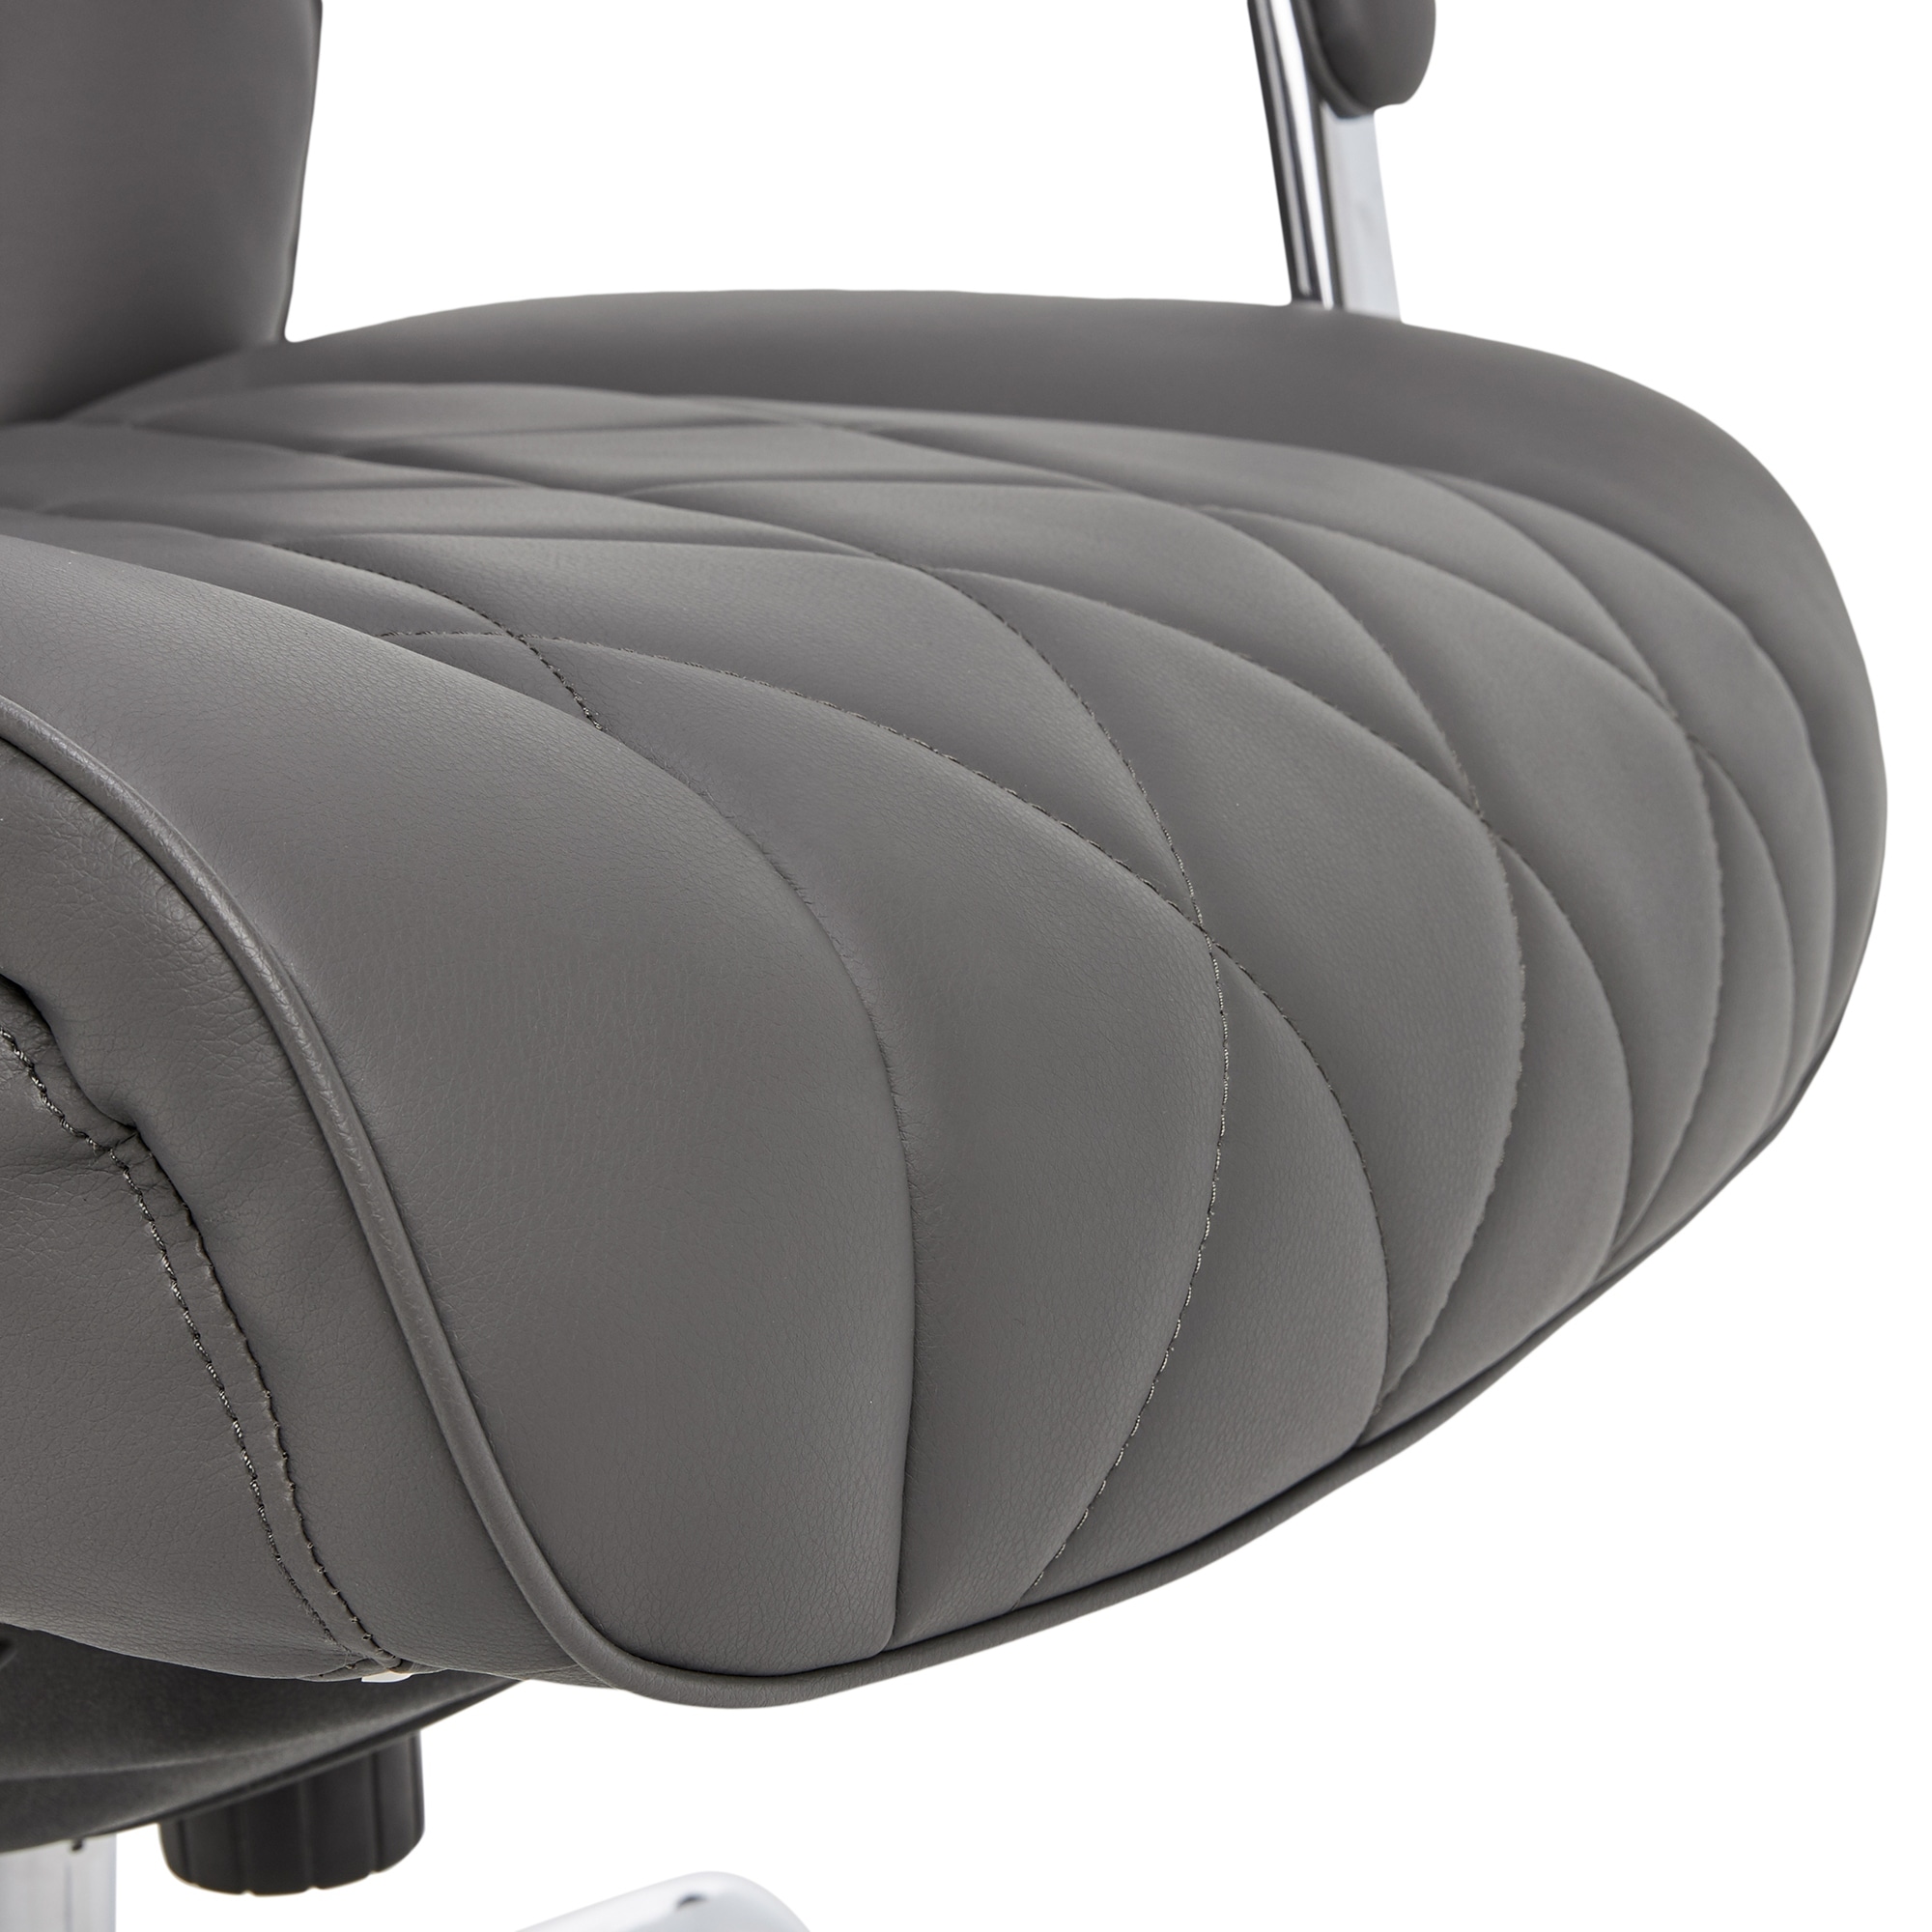 La-Z-Boy Sutherland Quilted Leather Executive Office Chair - High Back with  Lumbar Support - On Sale - Bed Bath & Beyond - 22800496